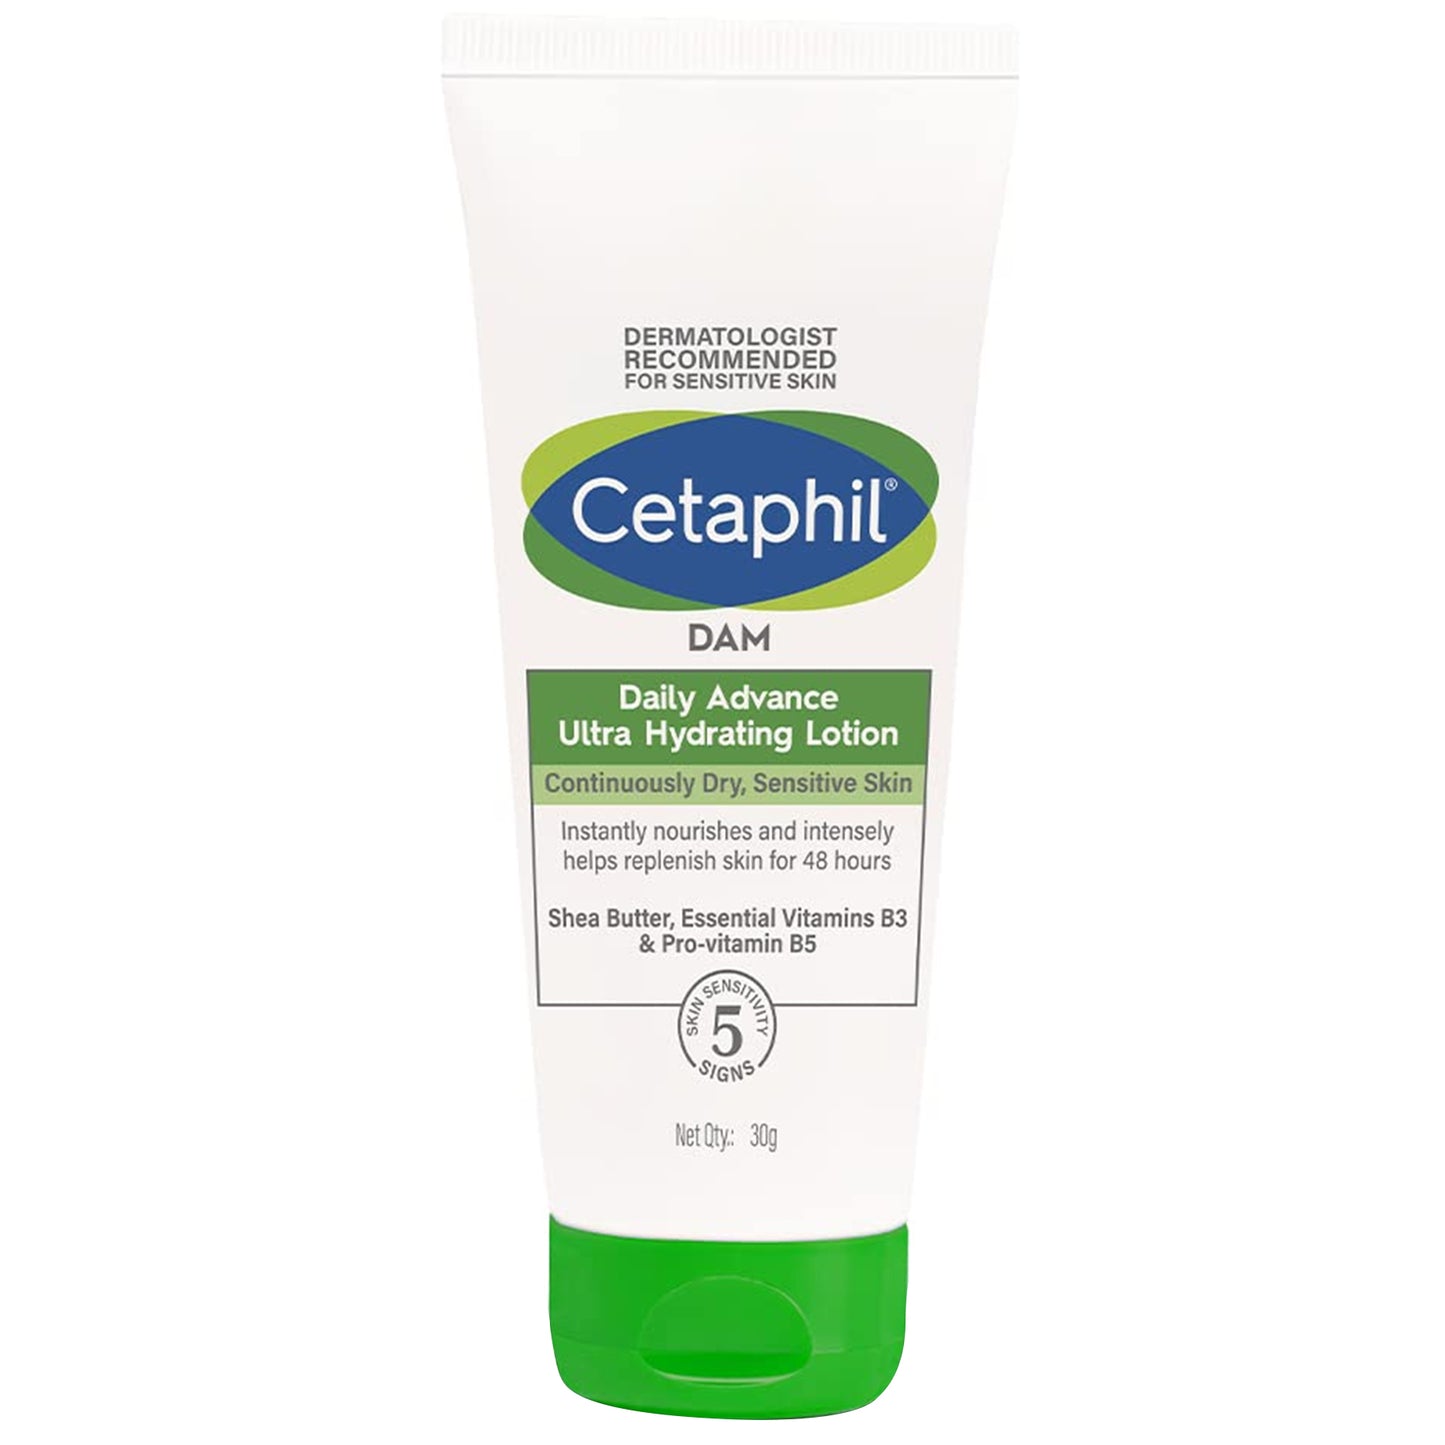 Cetaphil DAM - Daily Advance Ultra Hydrating Lotion, 30gm